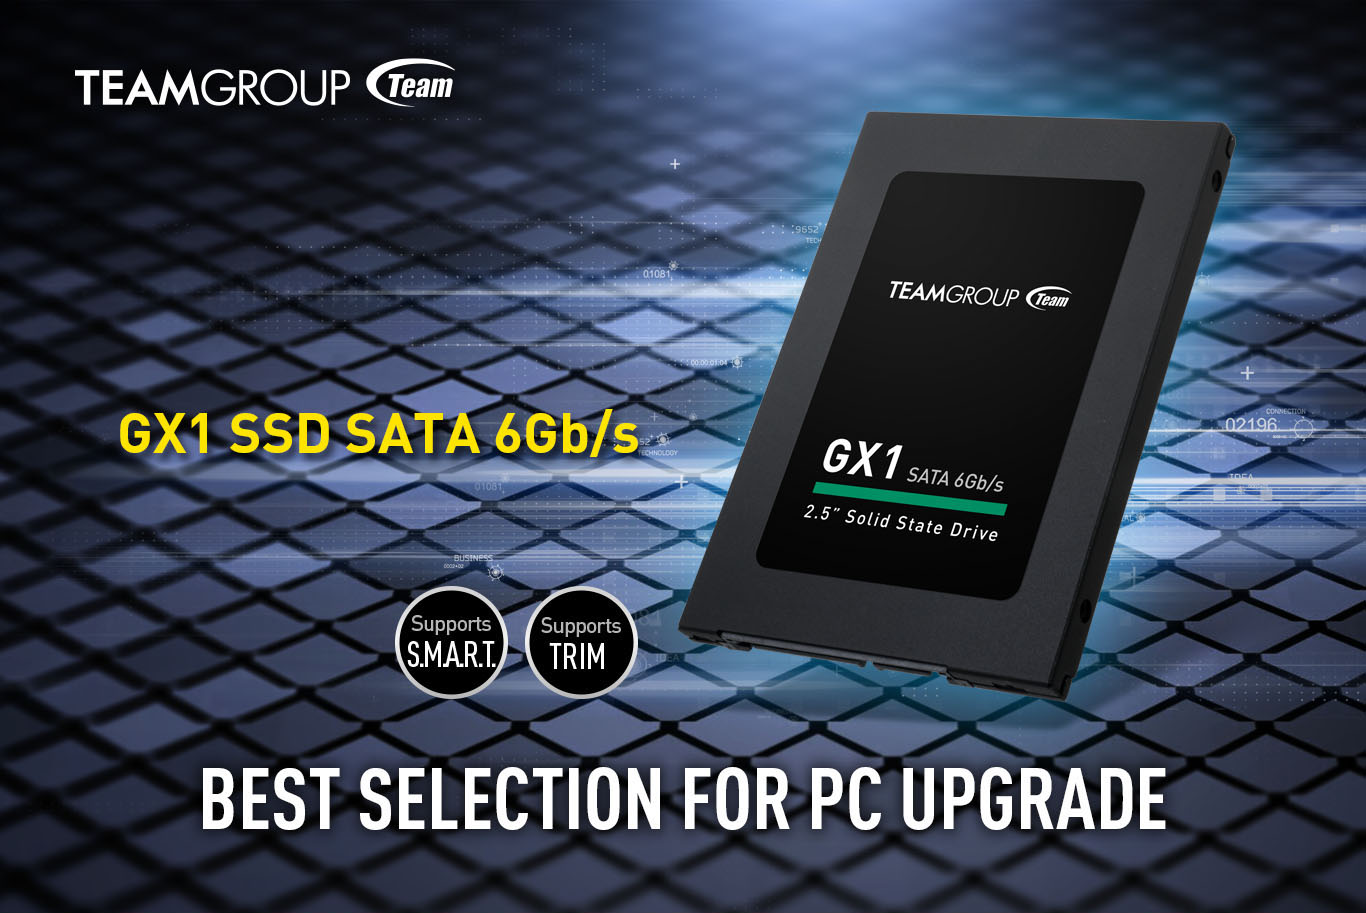 Team Group GX1 SSD SATA 6 Gigabits per second banner with the SSD angled up to the left along with text that reads: Supports S.M.A.R.T., Supports TRIM and BEST SELECTION FOR PC UPGRADE